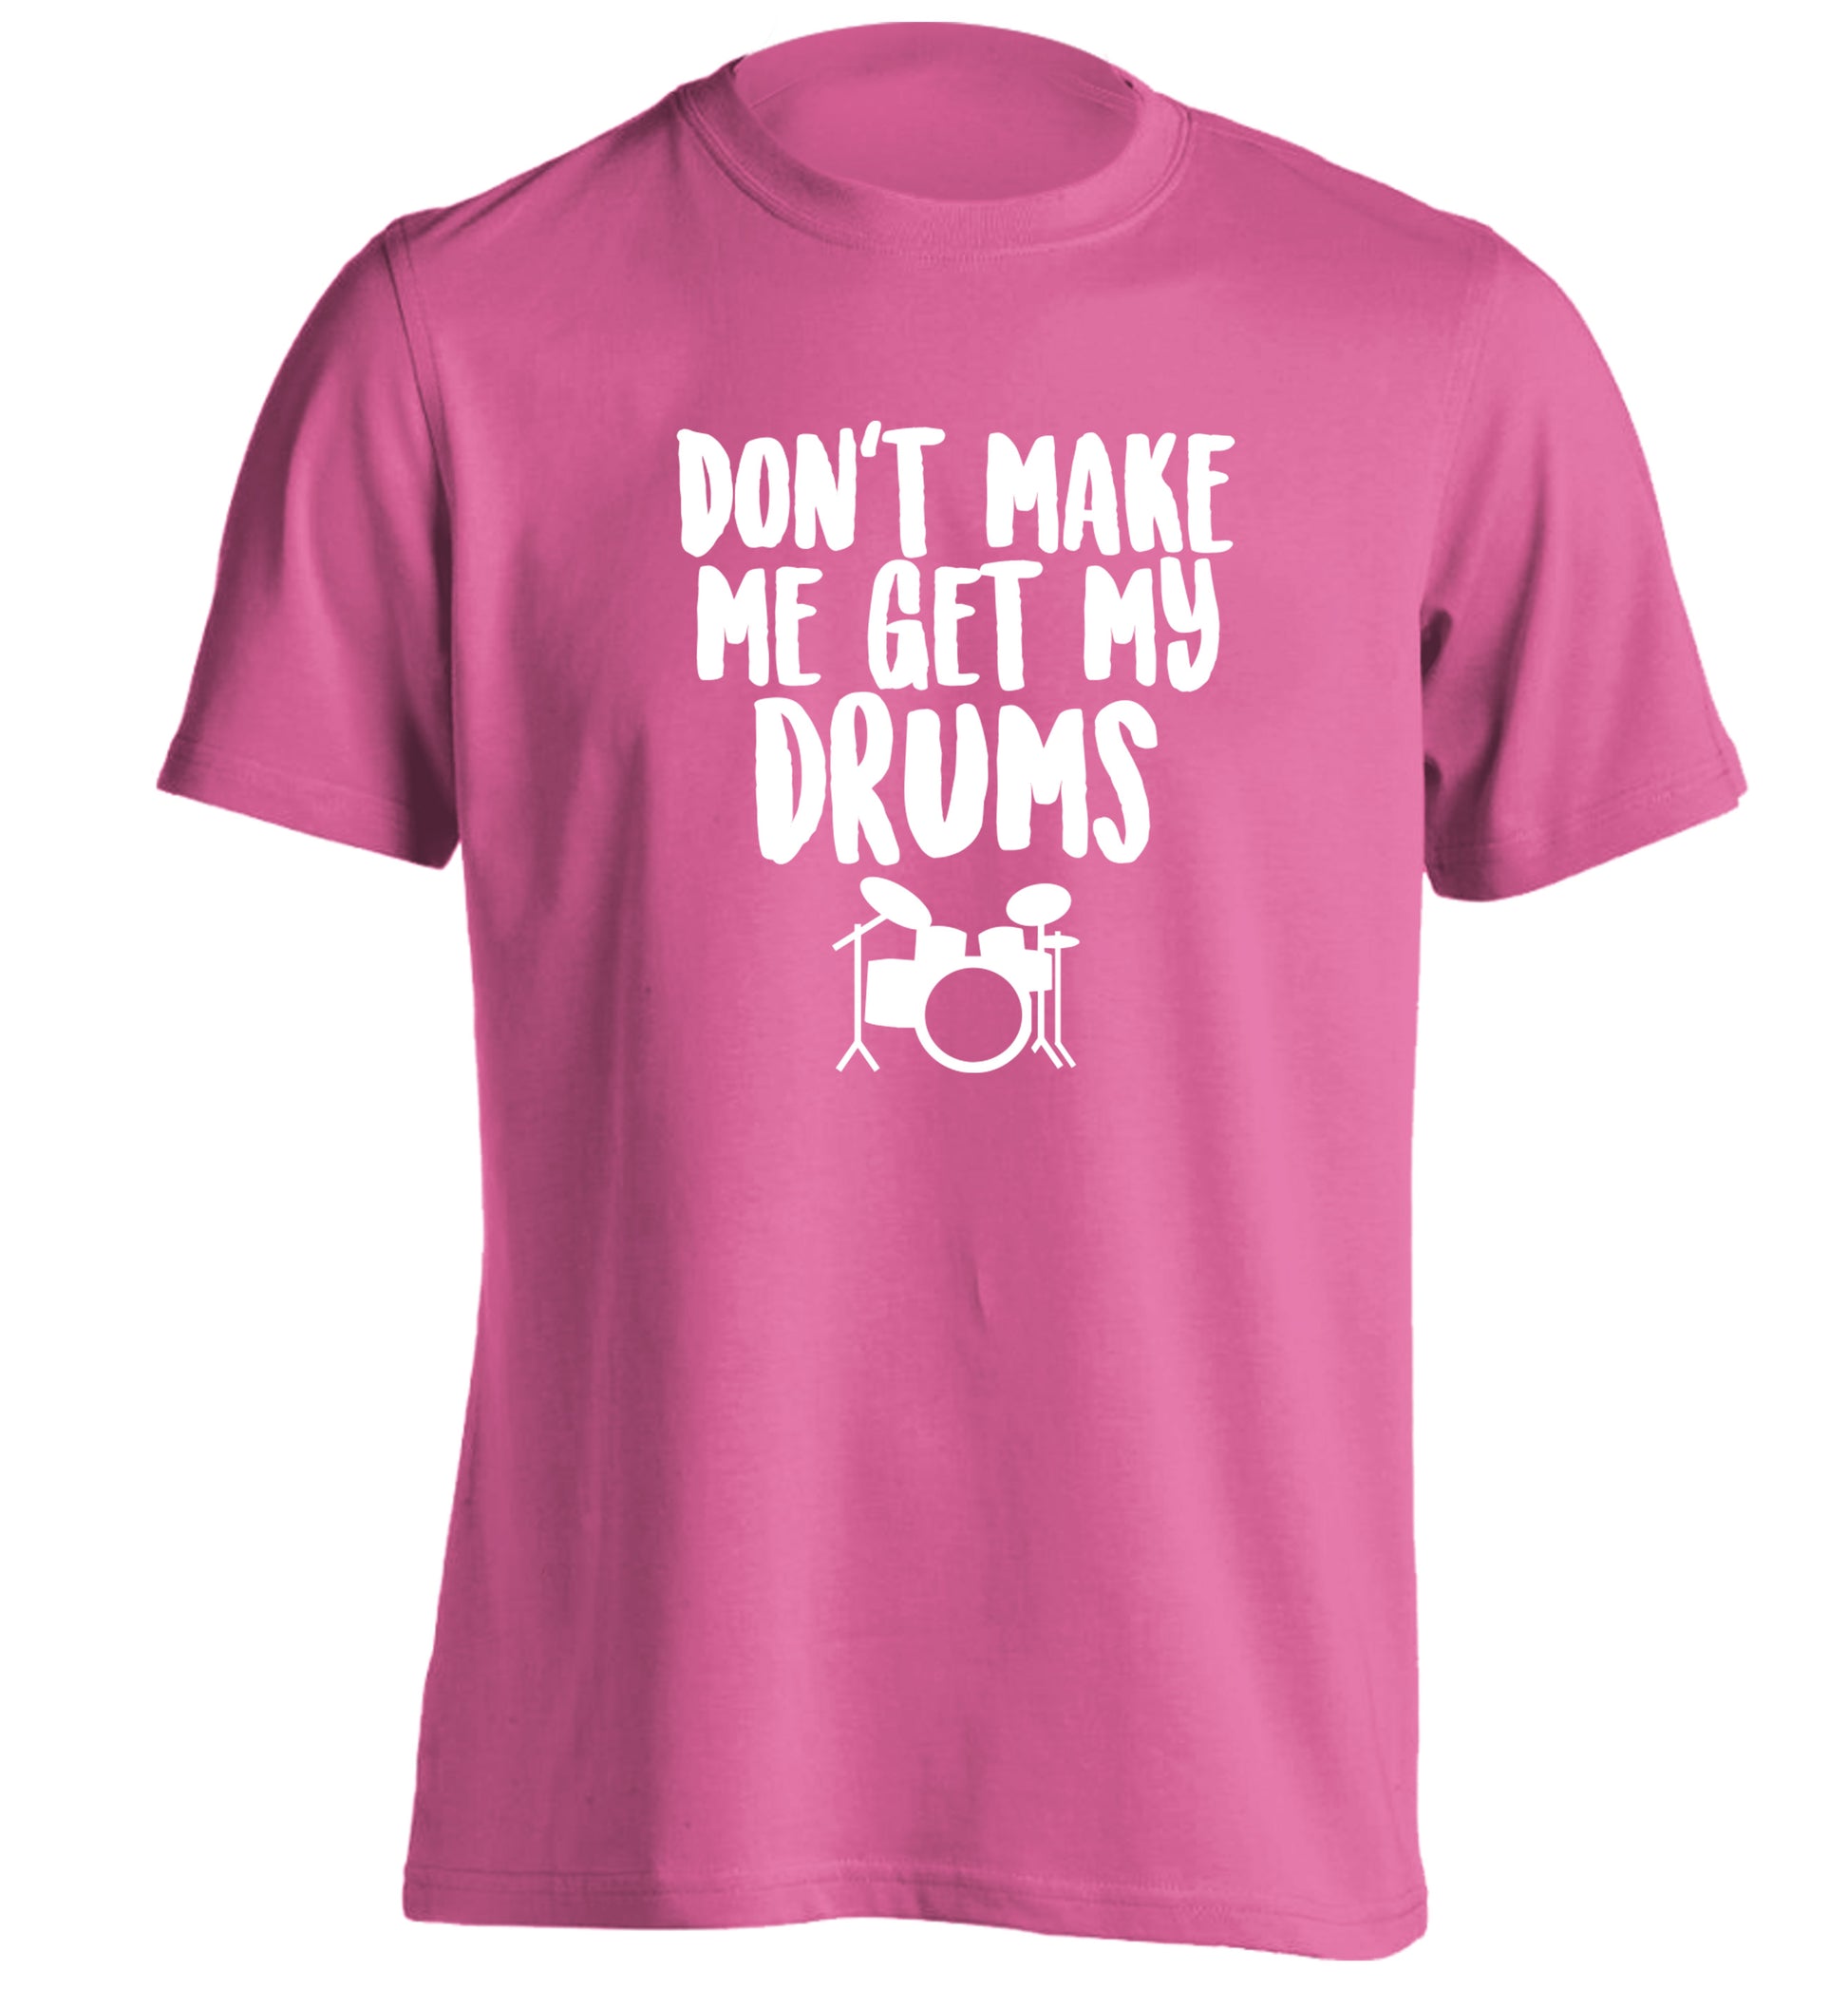 Don't make me get my drums adults unisex pink Tshirt 2XL